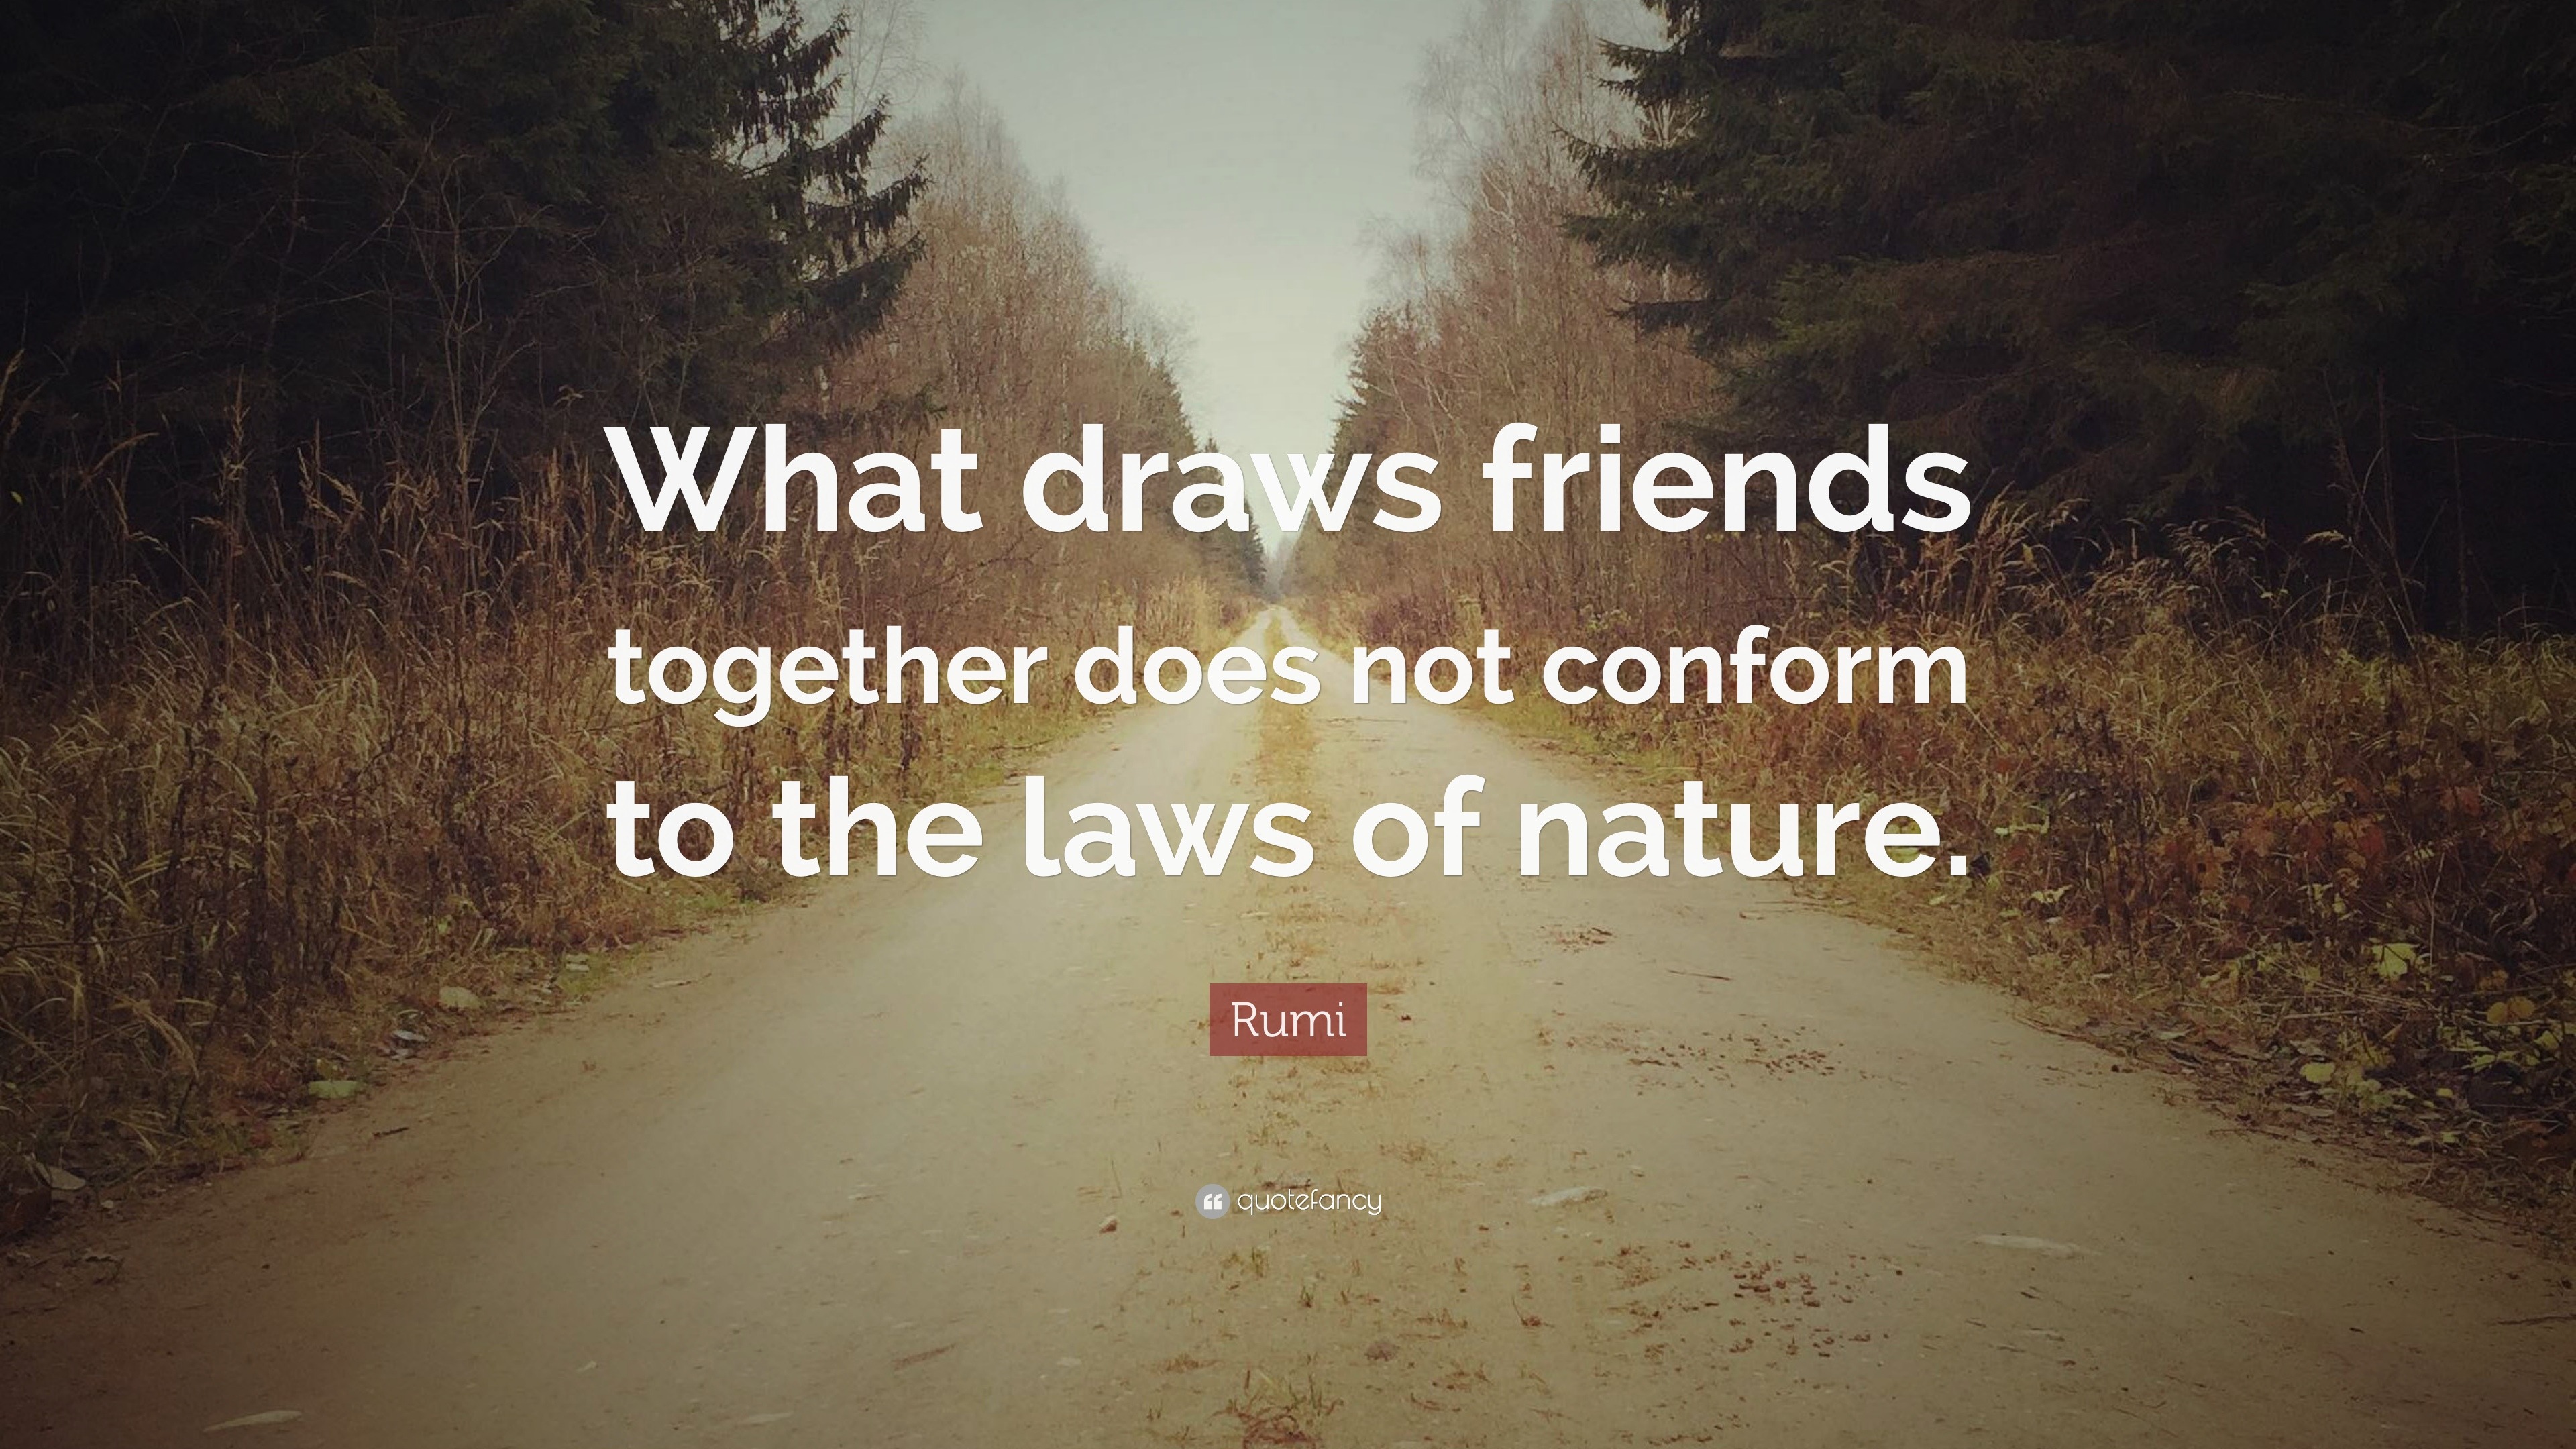 Rumi Quote: “What draws friends together does not conform to the laws